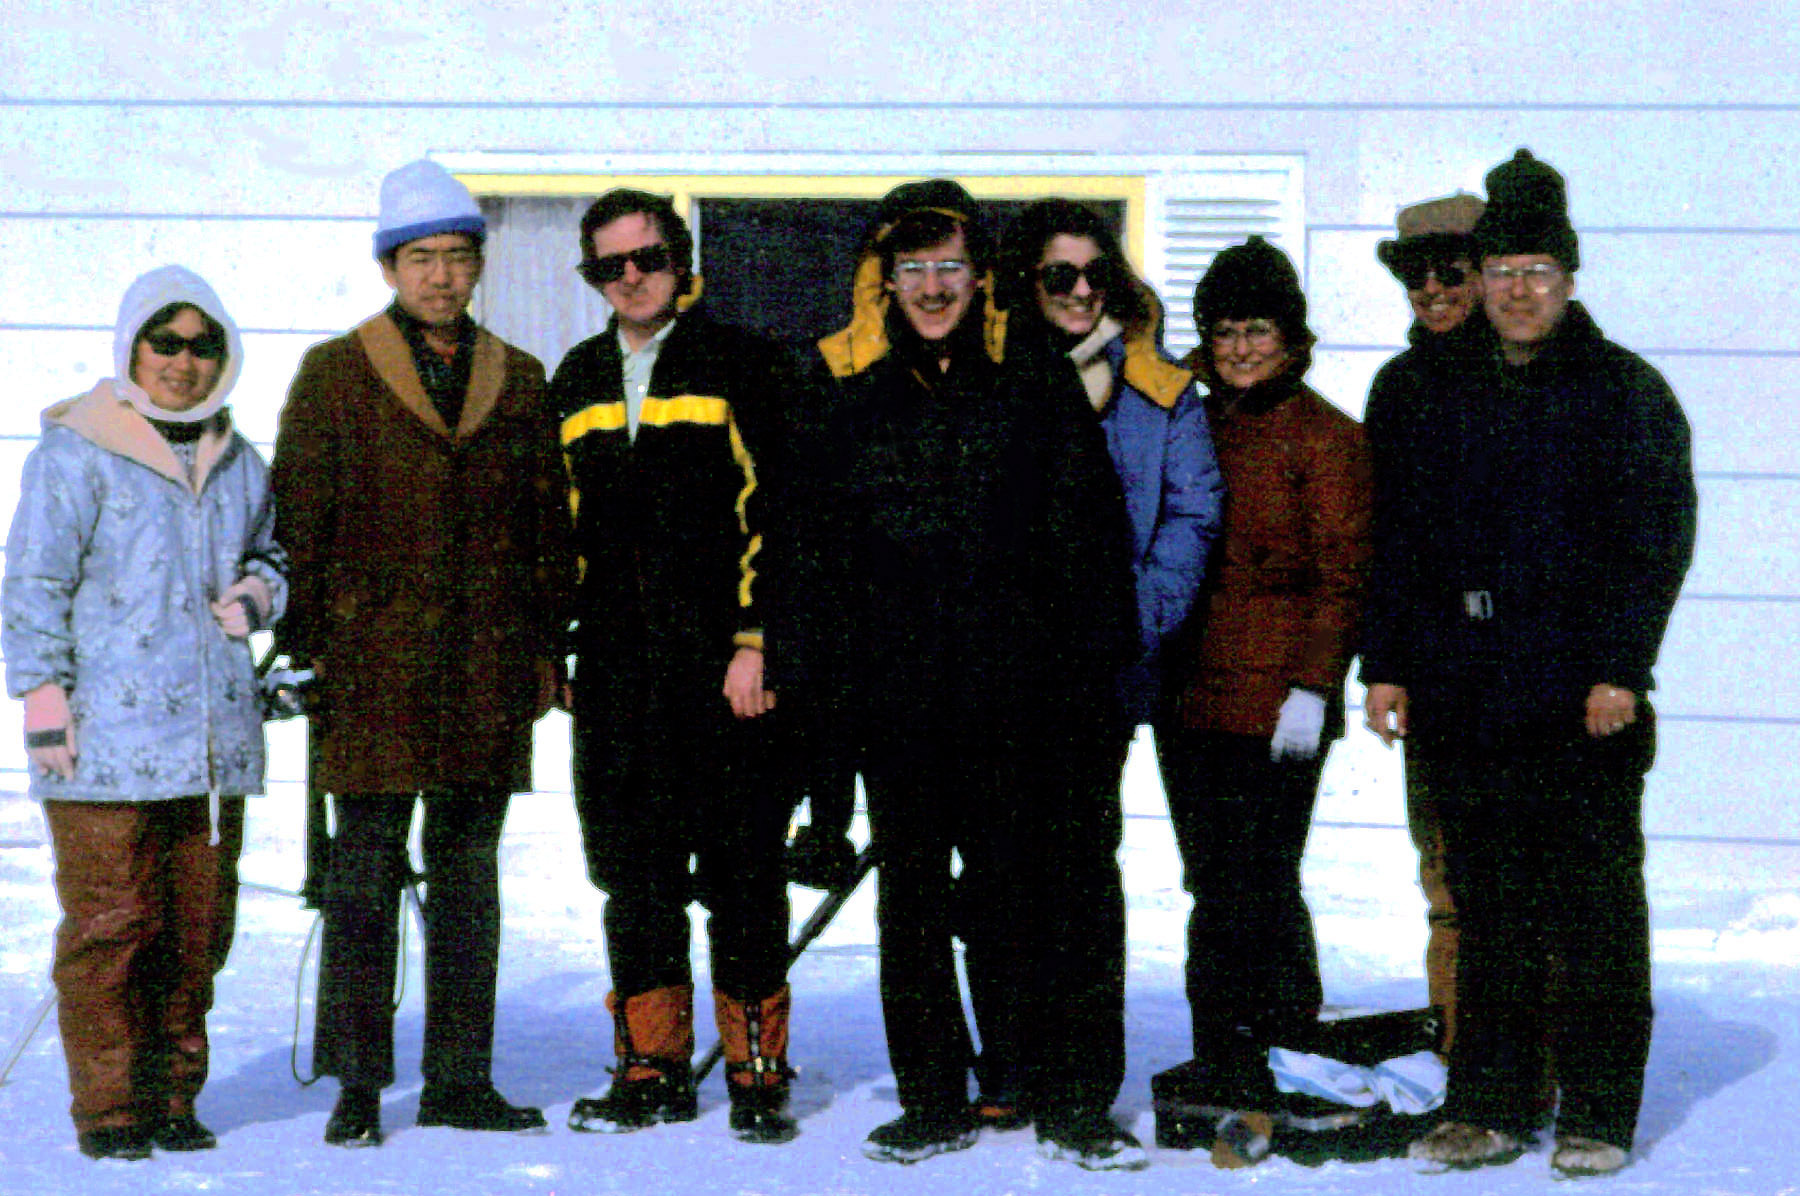 Eclipse 1979 - A10 - February 26 - WAS Members